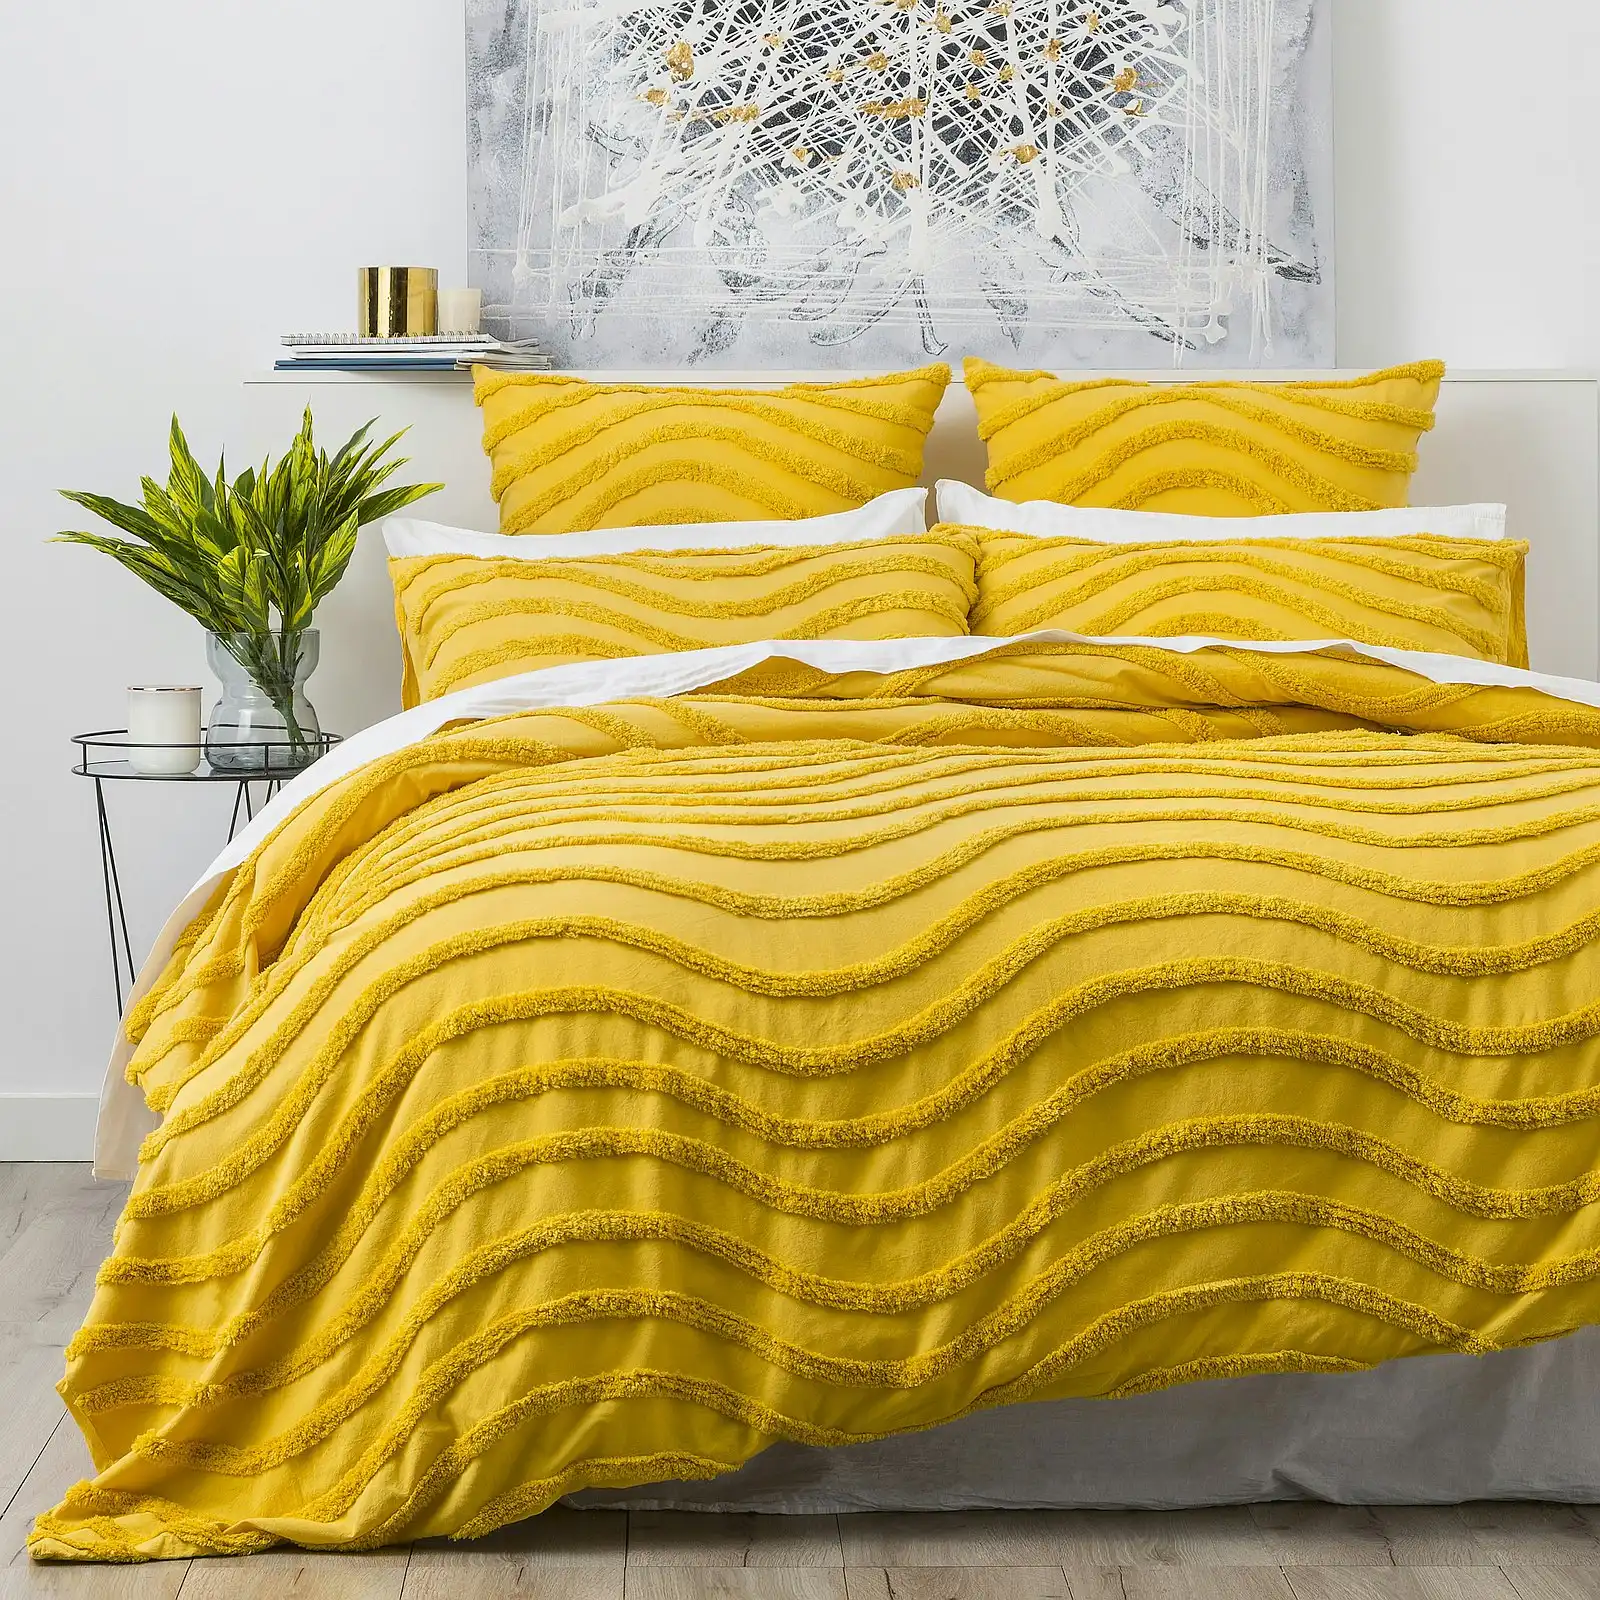 Cloud Linen Wave King Bed Quilt Cover Chenille VIN Washed Tufted Cotton Mustard